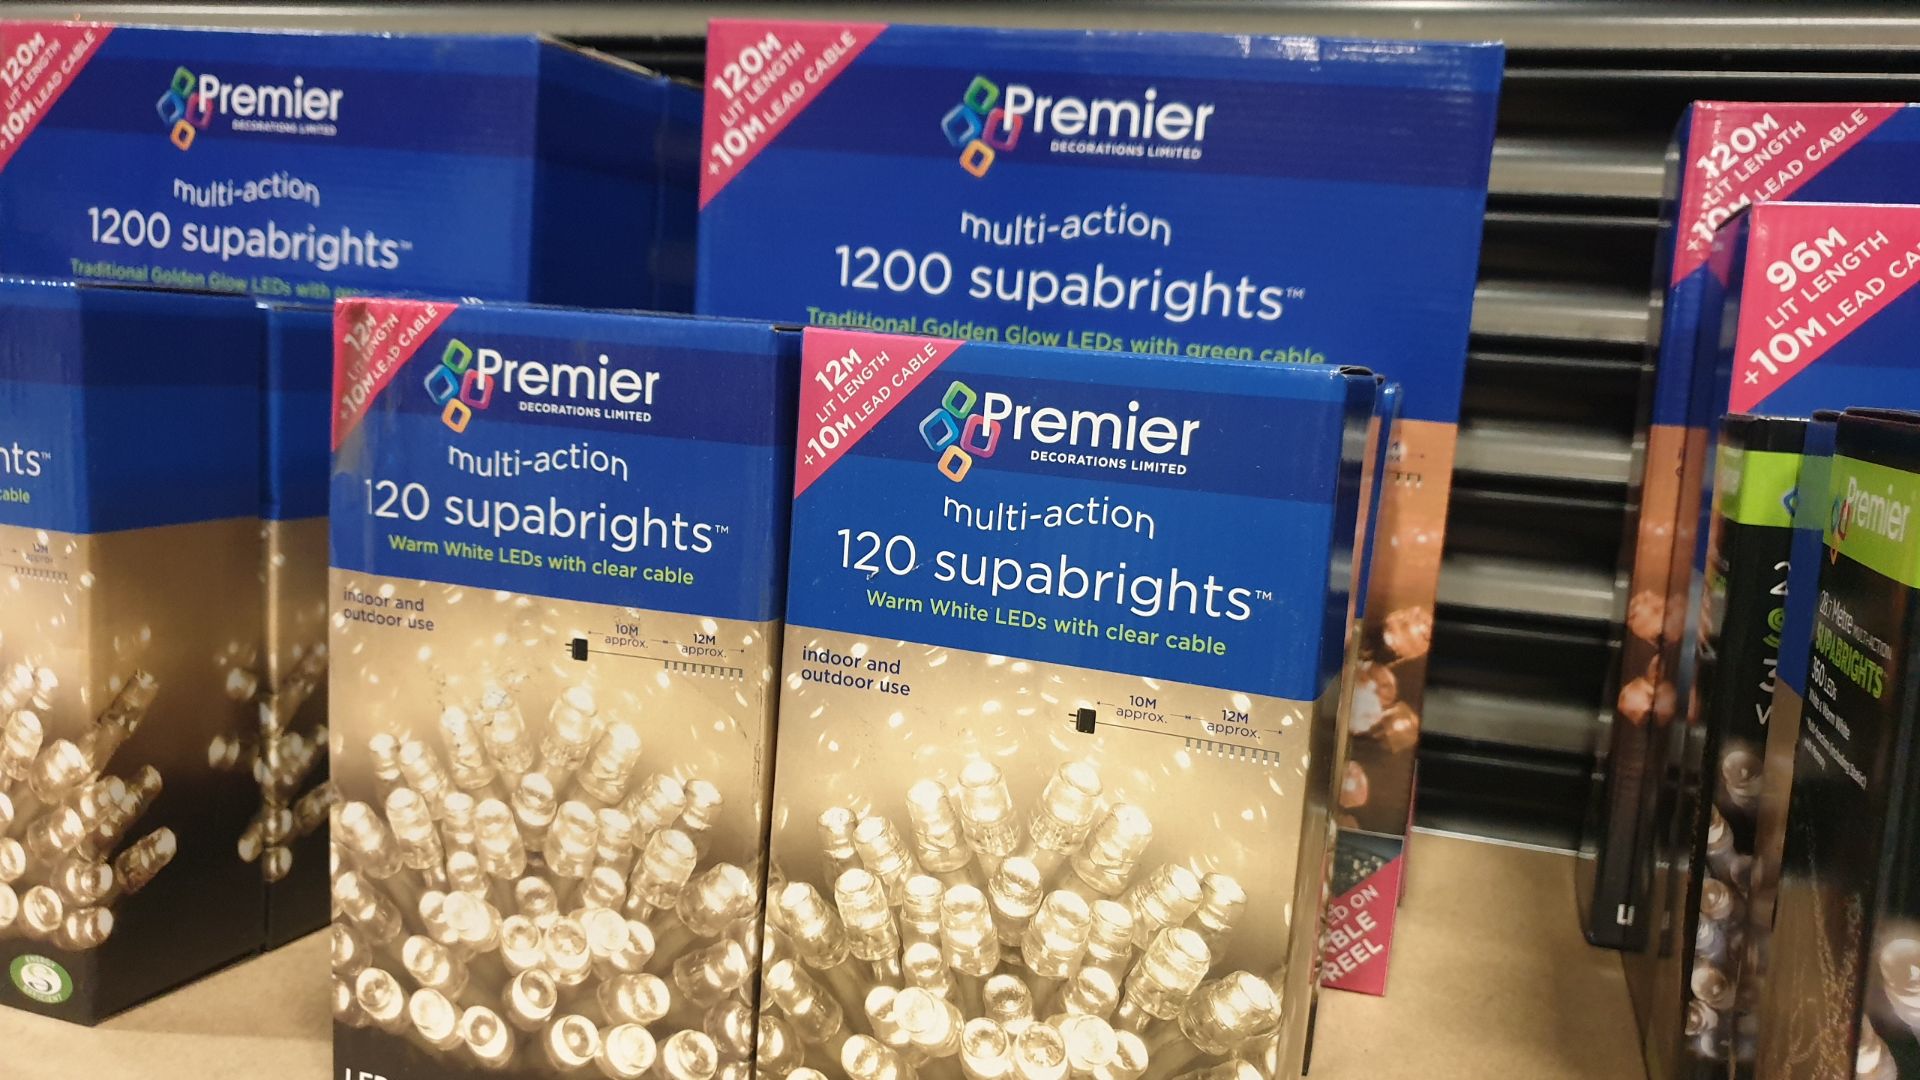 MIXED PREMIER LIGHTS LOT CONTAINING 8 PIECES IE 12OM TRADITIONAL GOLDEN GLOW SUPABRIGHT, 12M MULTI